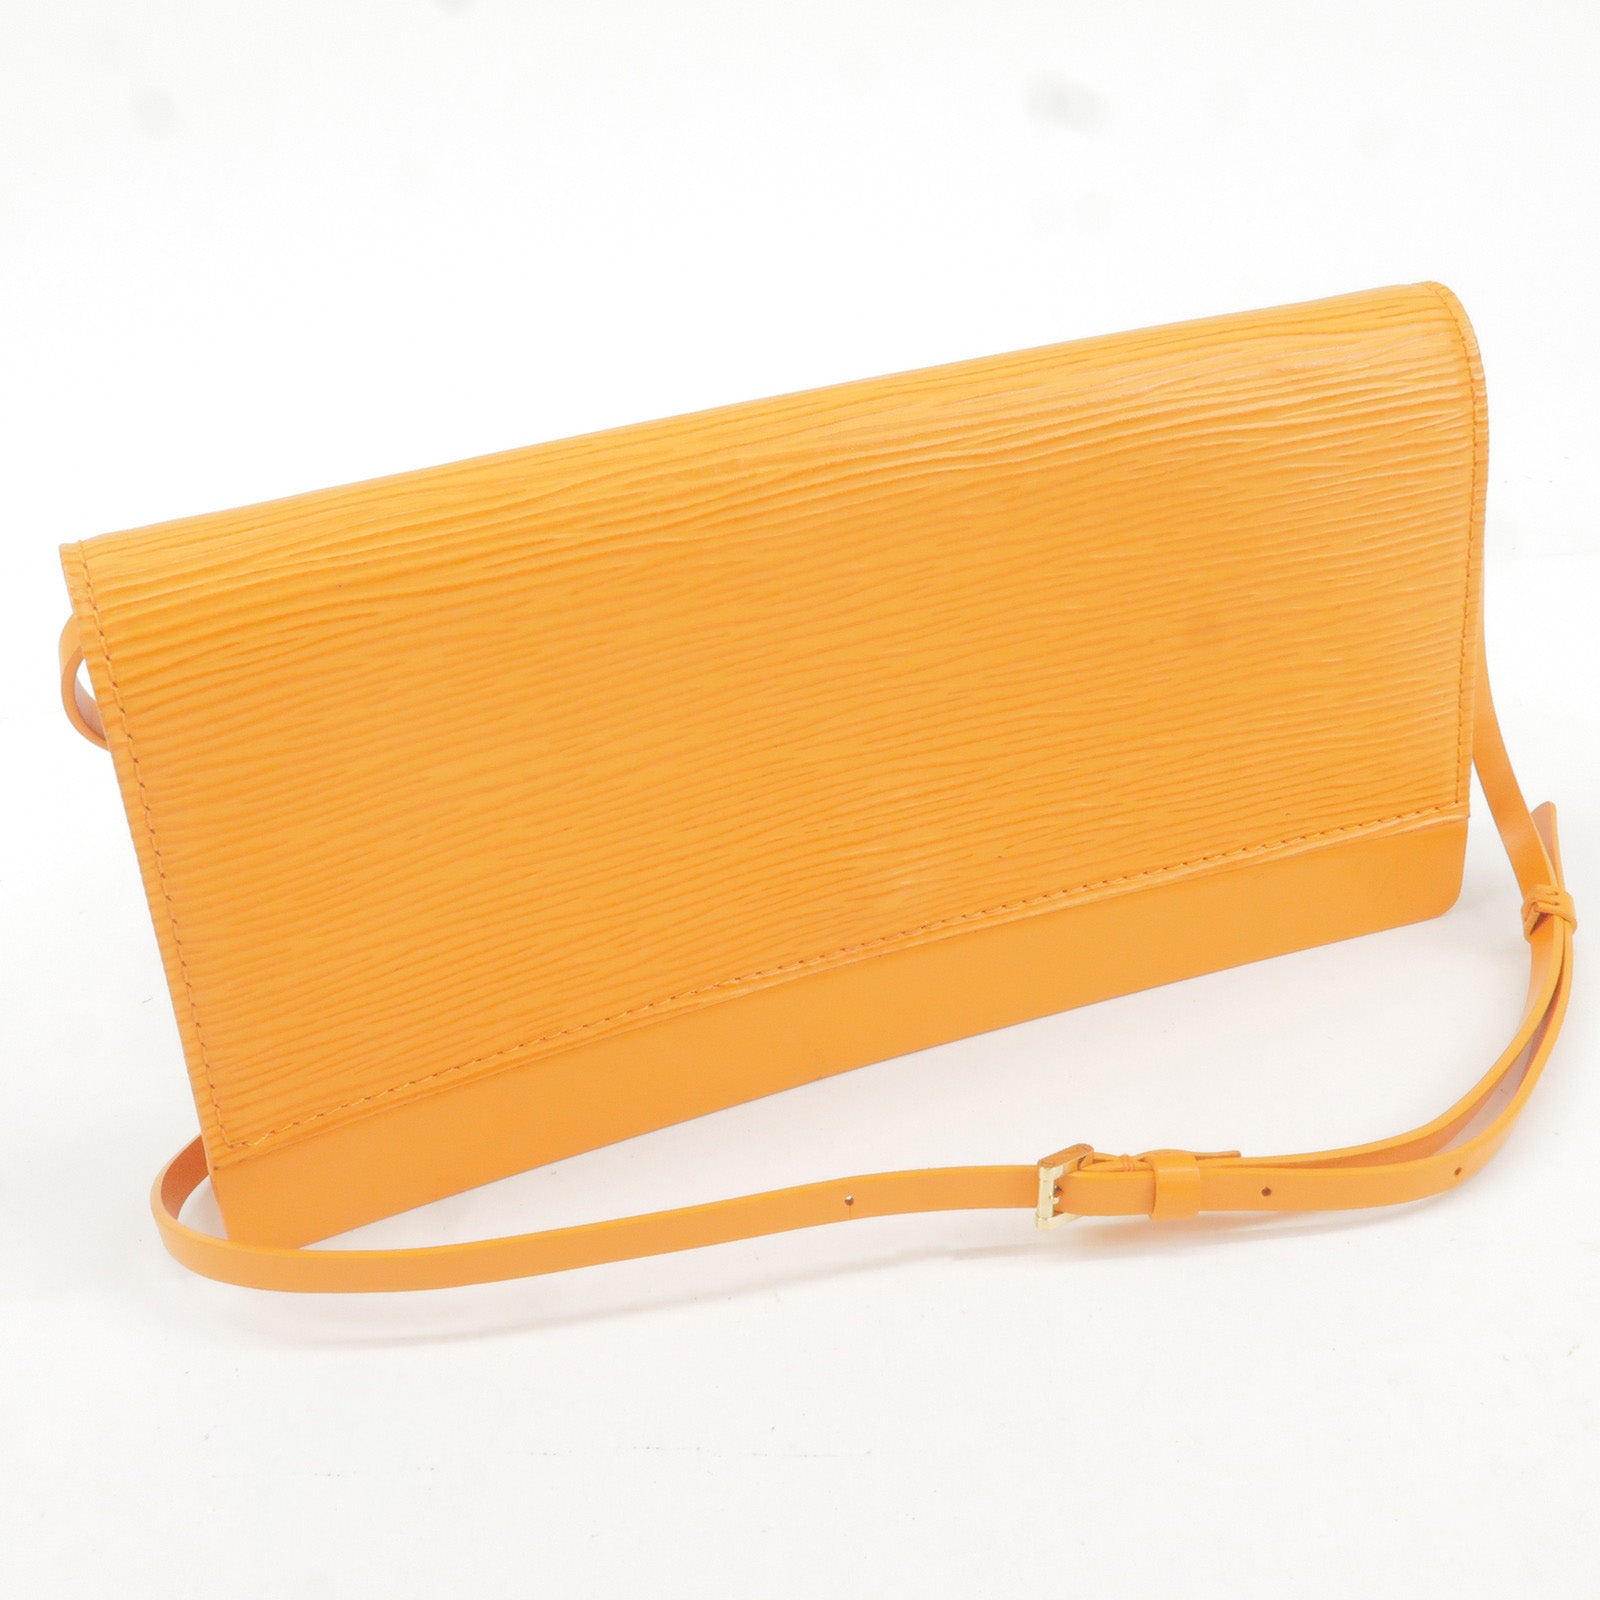 Louis Vuitton Cosmetic Pouch Orange Patent Leather Clutch Bag (Pre-Owned)